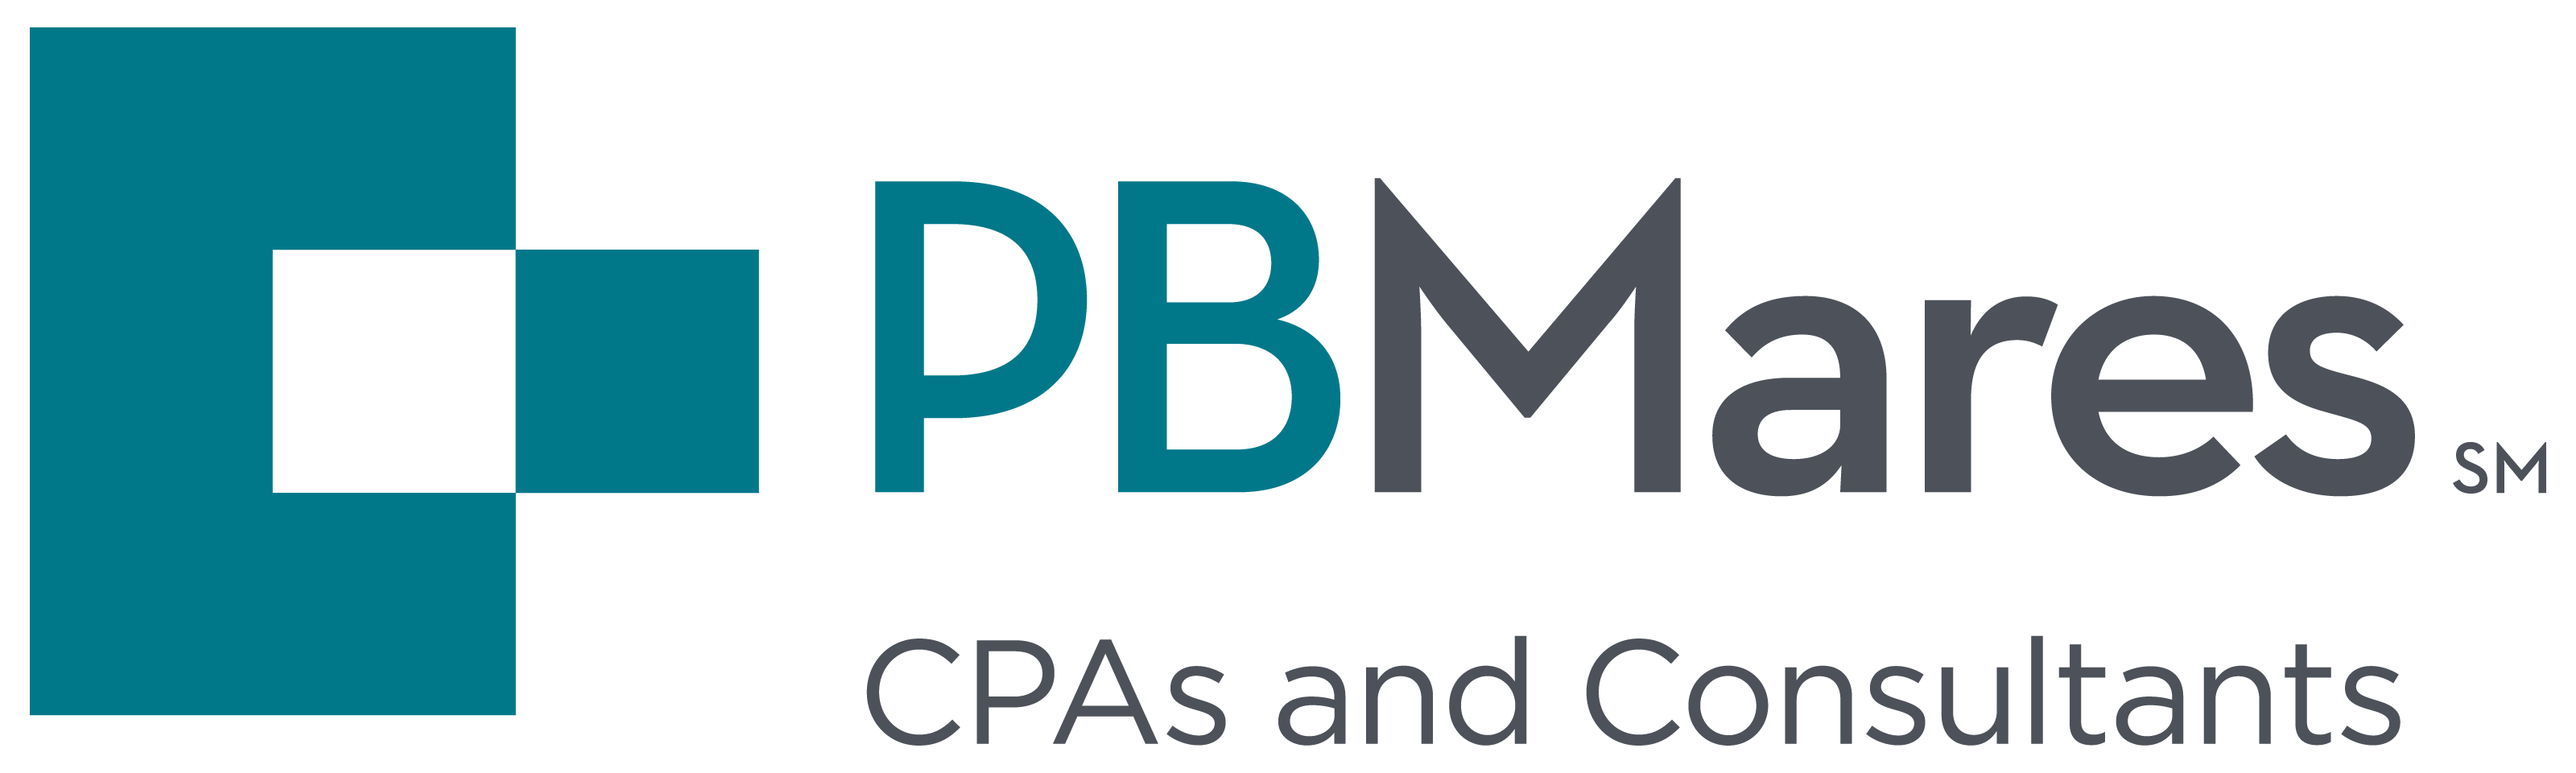 pbmares cpas and consultants logo